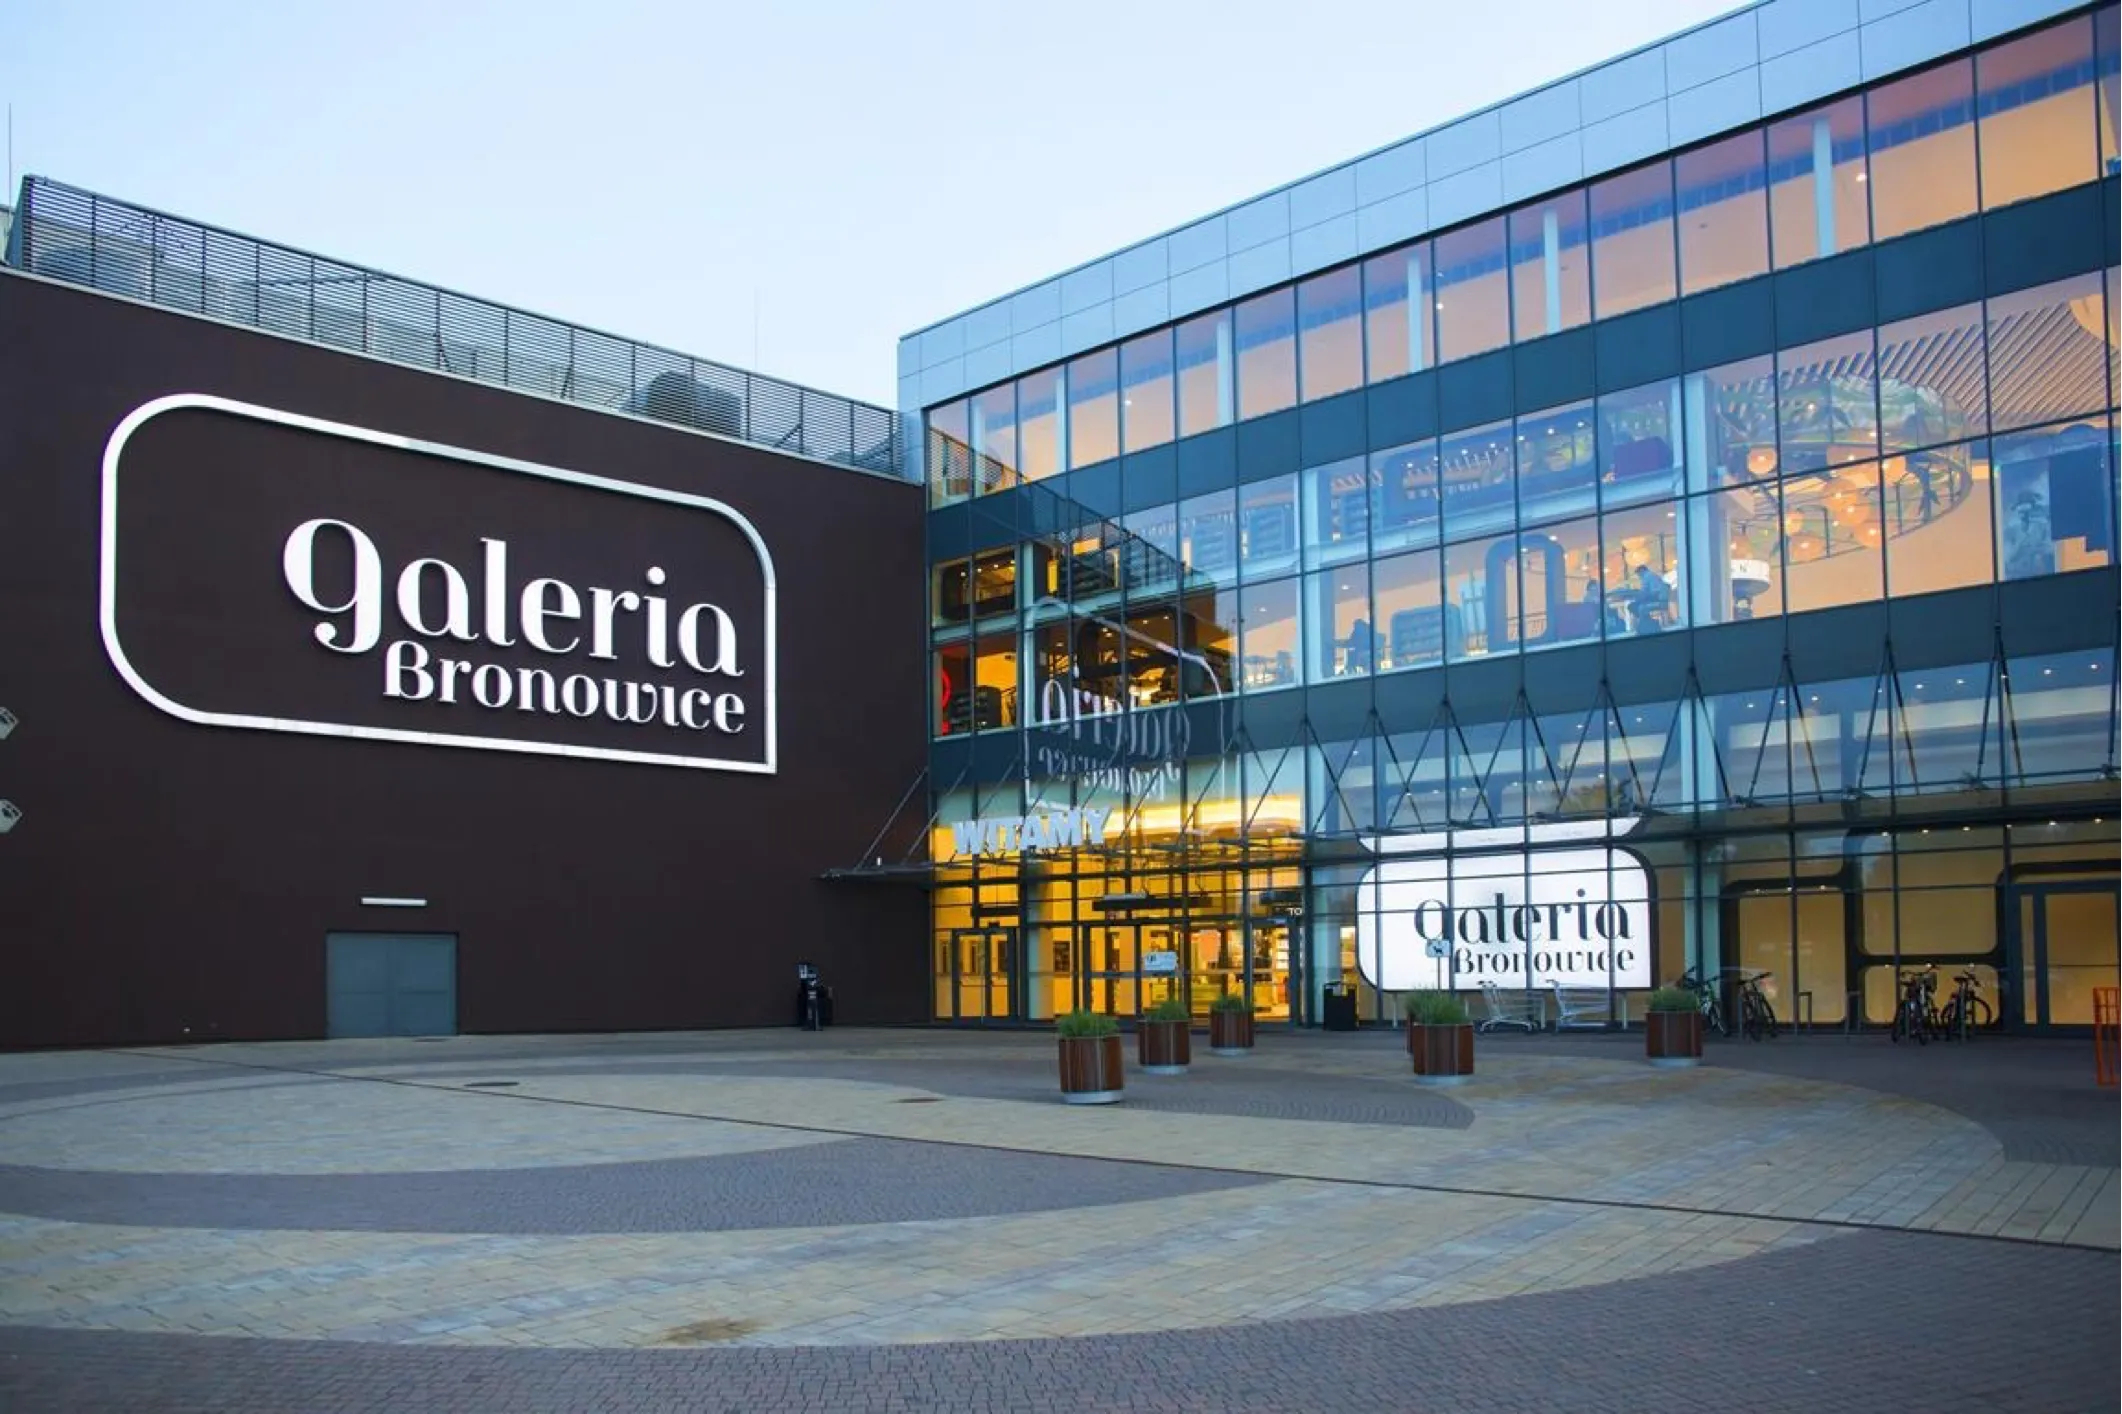 Galeria Bronowice in Poland, europe | Fragrance,Shoes,Accessories,Clothes,Cosmetics,Watches - Country Helper